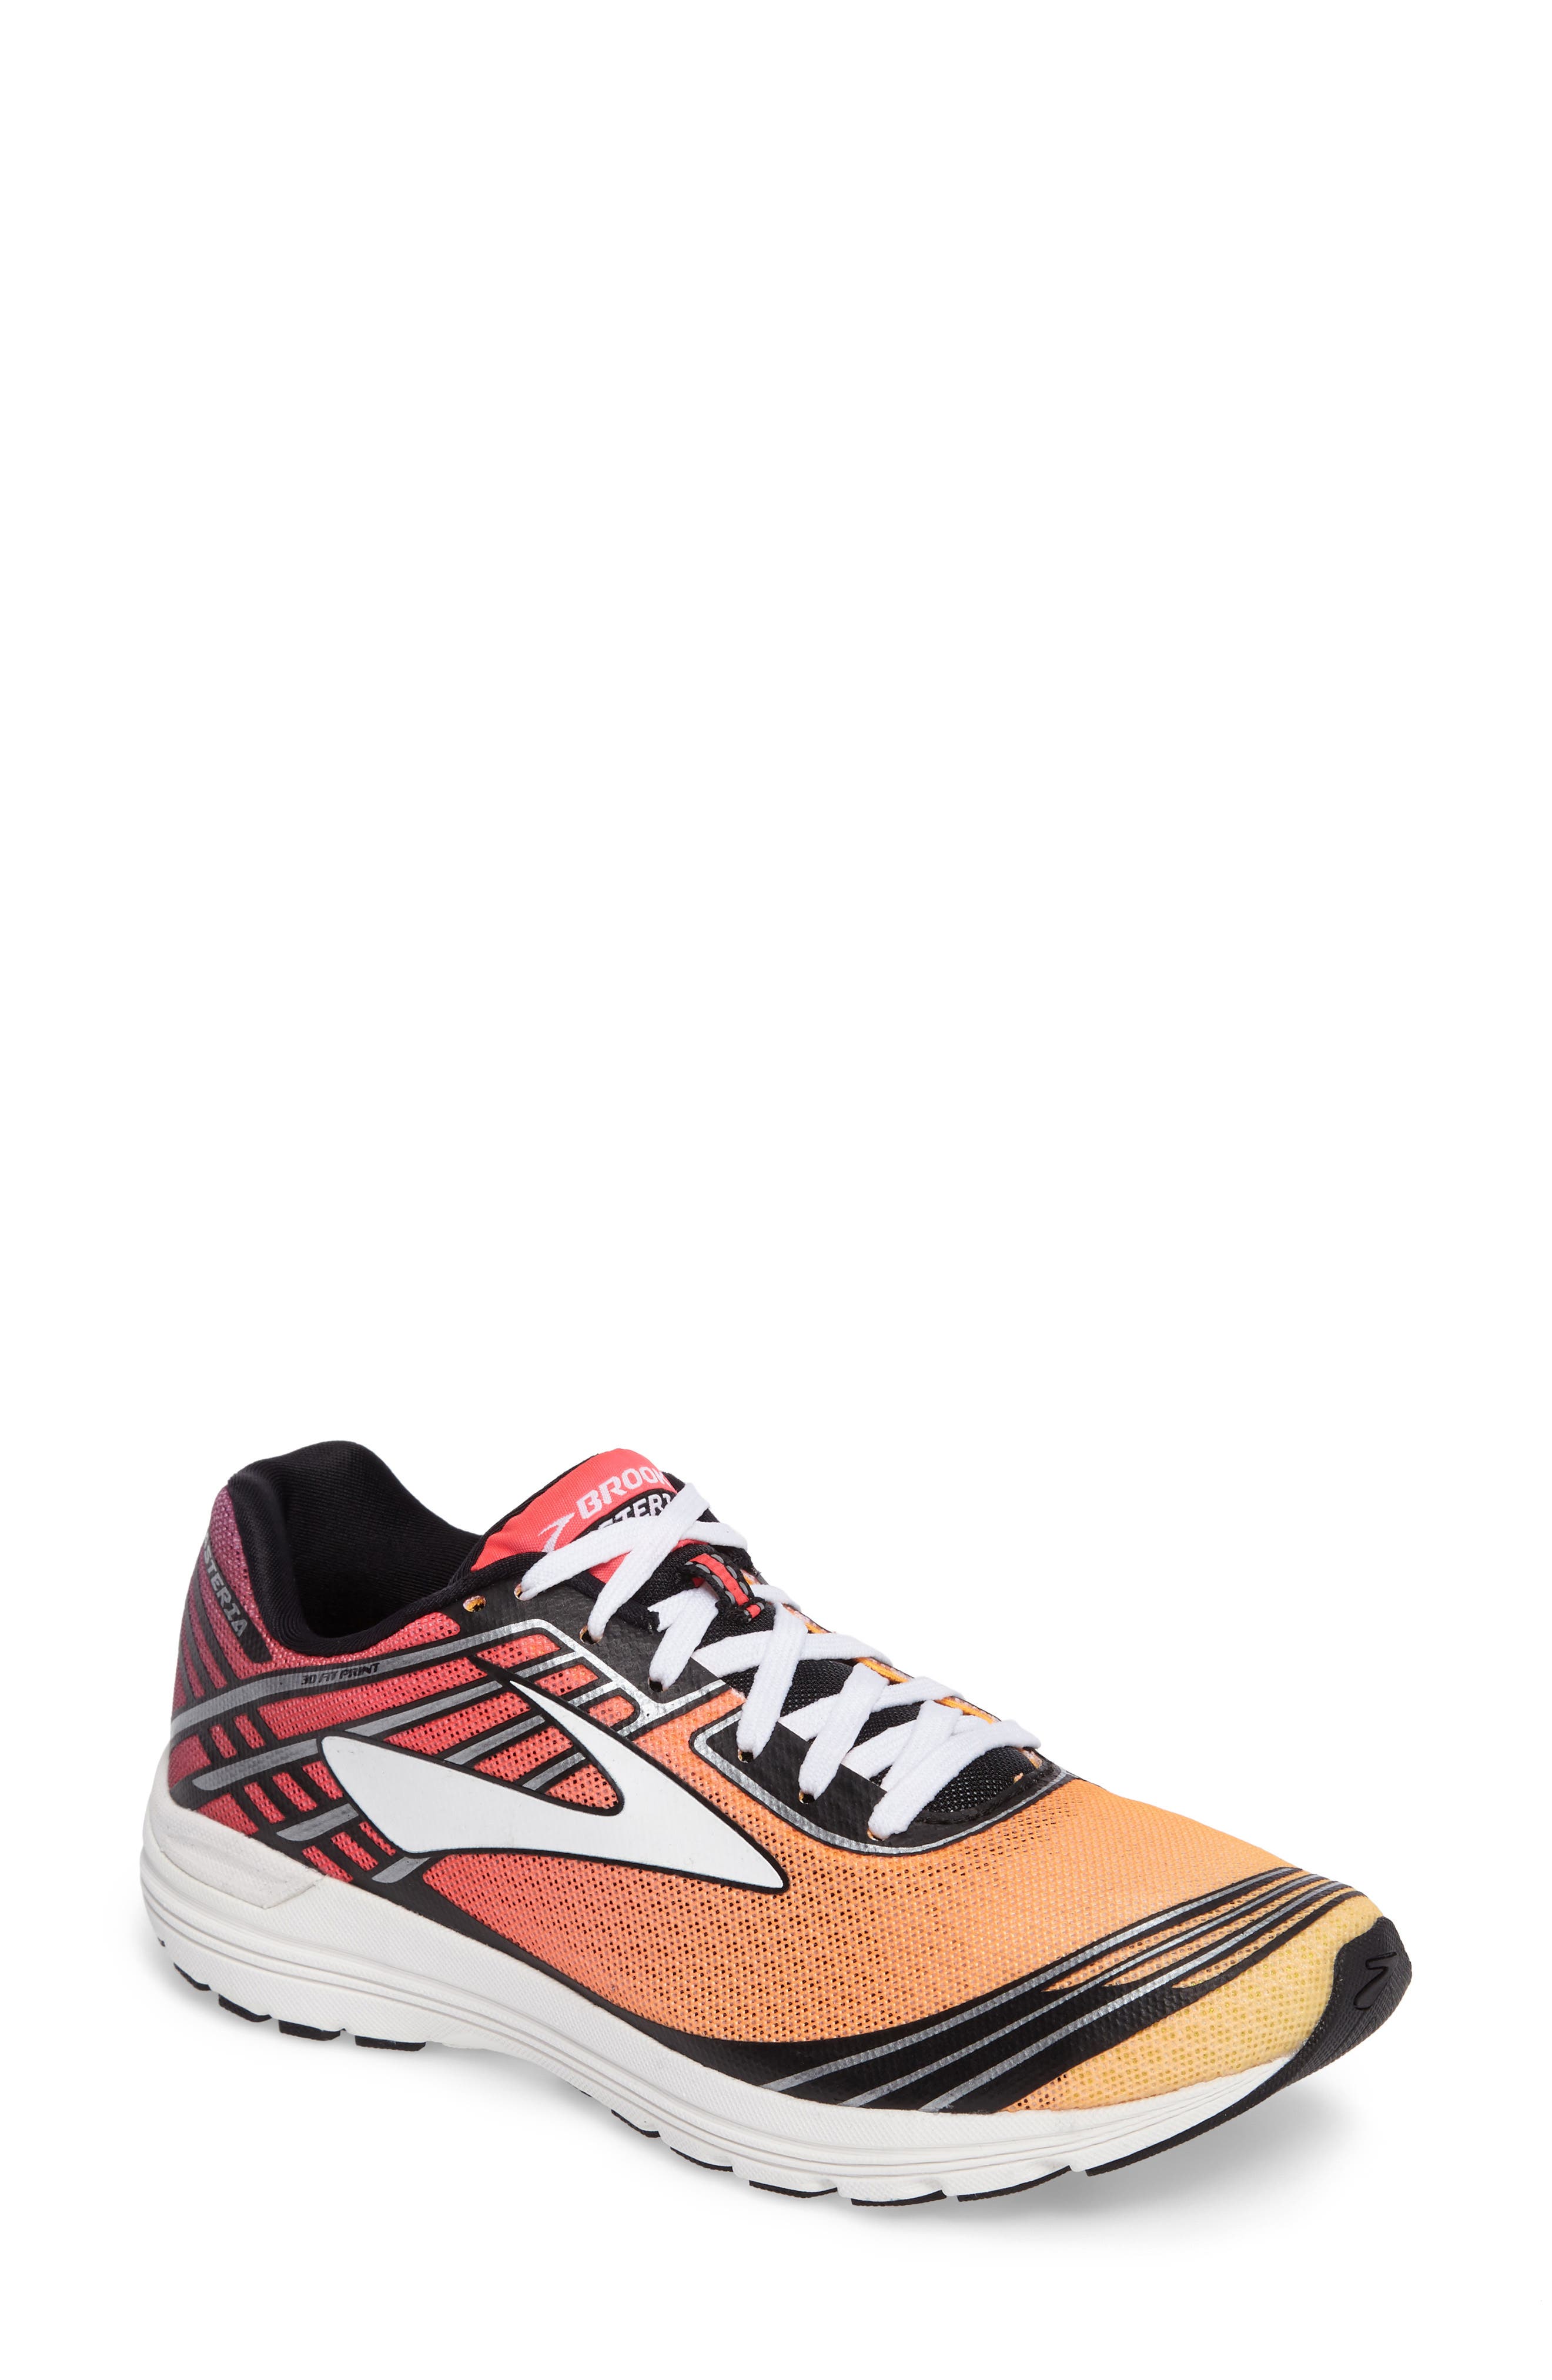 brooks asteria mens running shoes